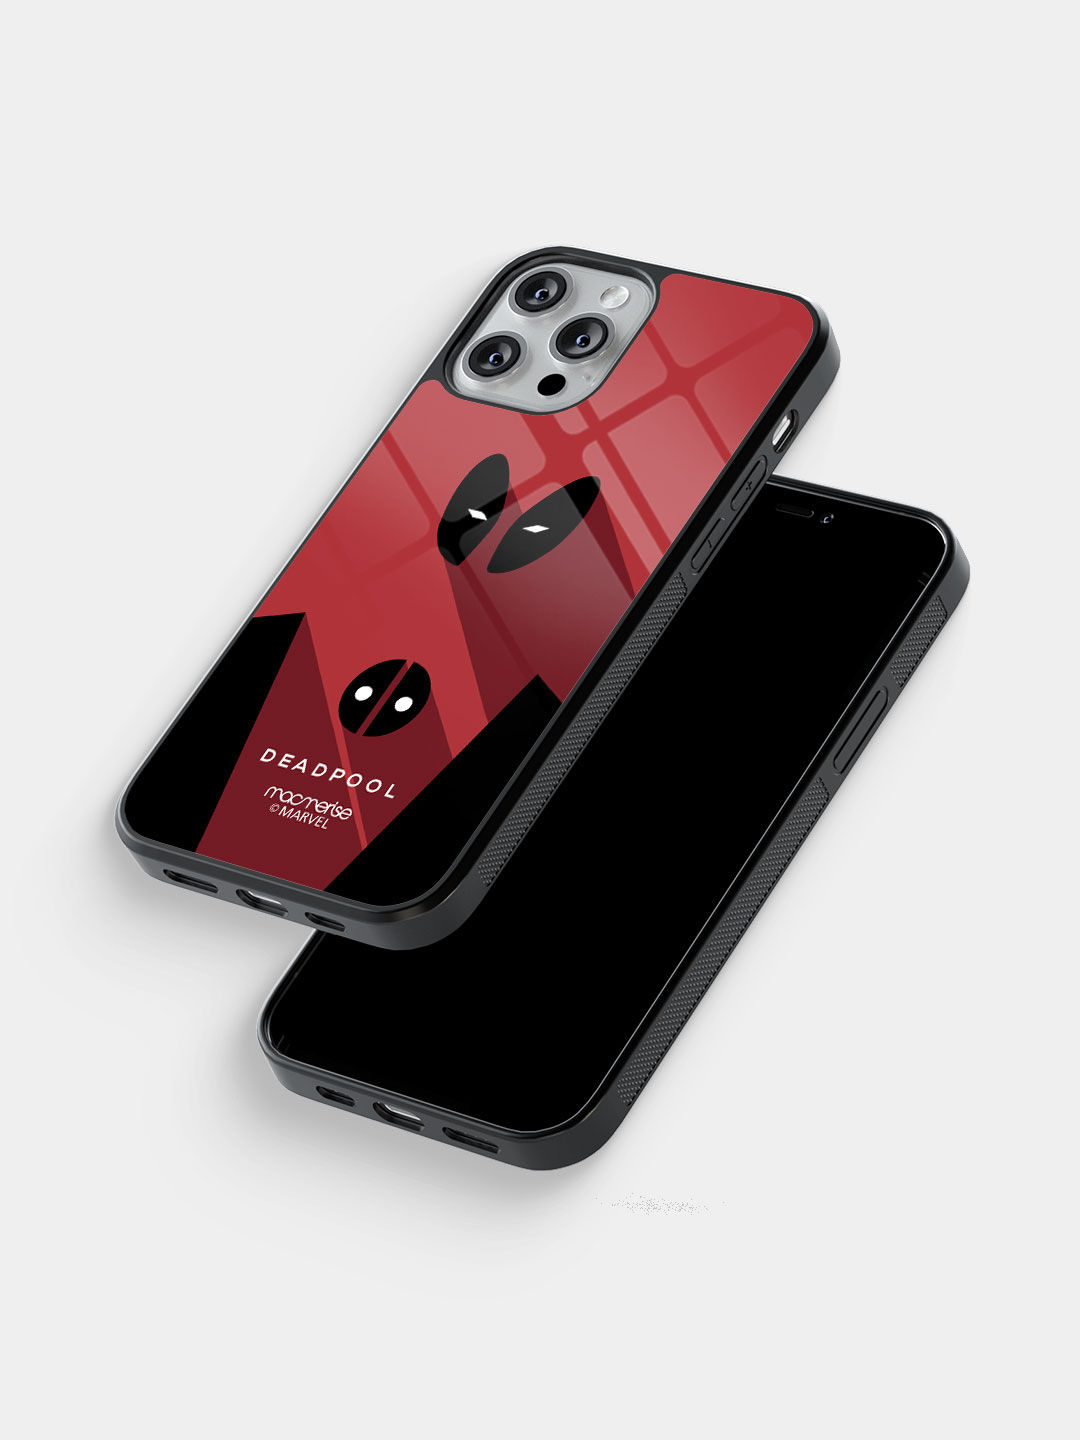 Minimalistic Deadpool - Glass Case For iPhone 13 Pro Max